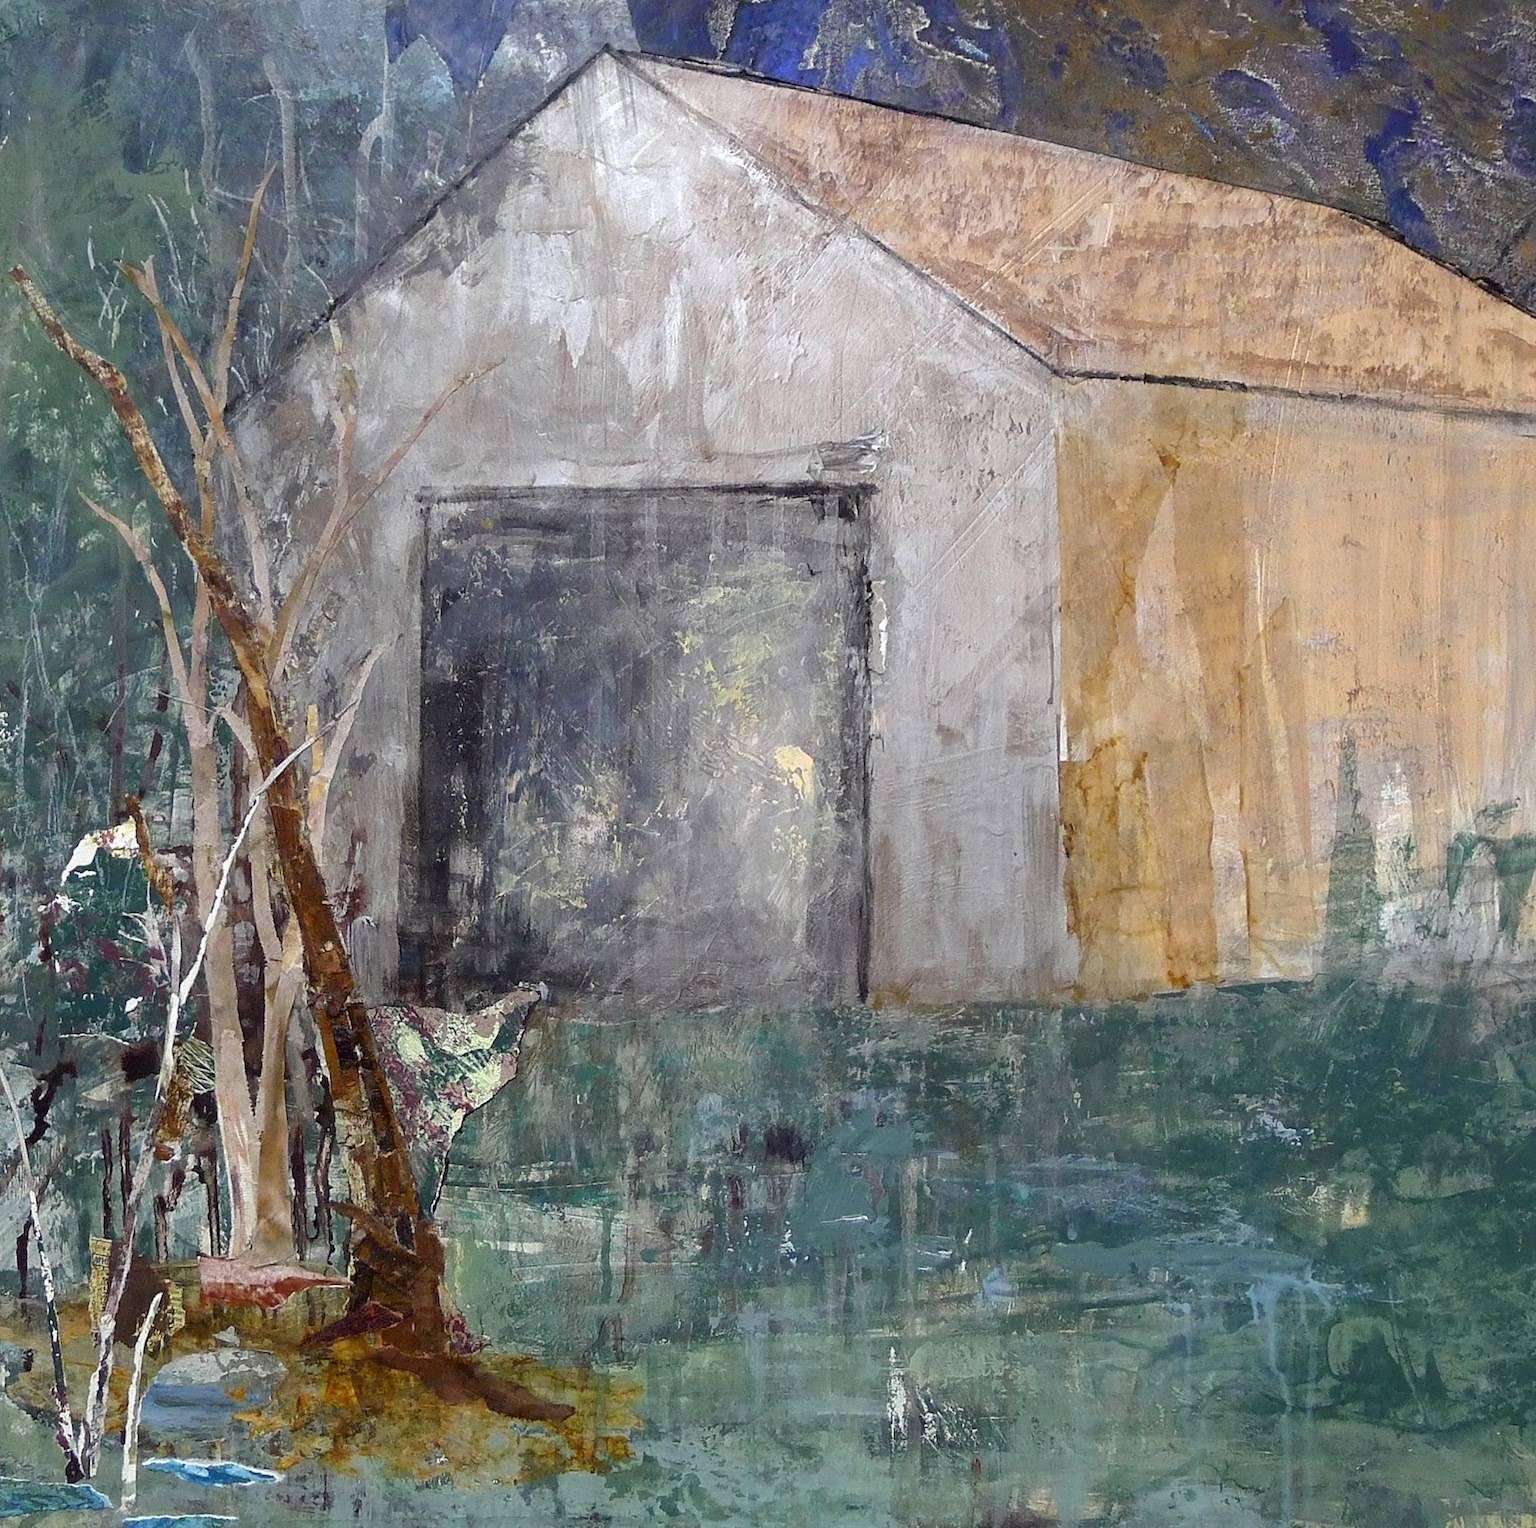 Brenda Cirioni’s painting “Evening Came” is from her “Barn Series” and depicts a warm silver barn with an open door. An unseen moon creates a golden glow on the roof and side wall of the barn adding a sense of mystery to the serene night. The